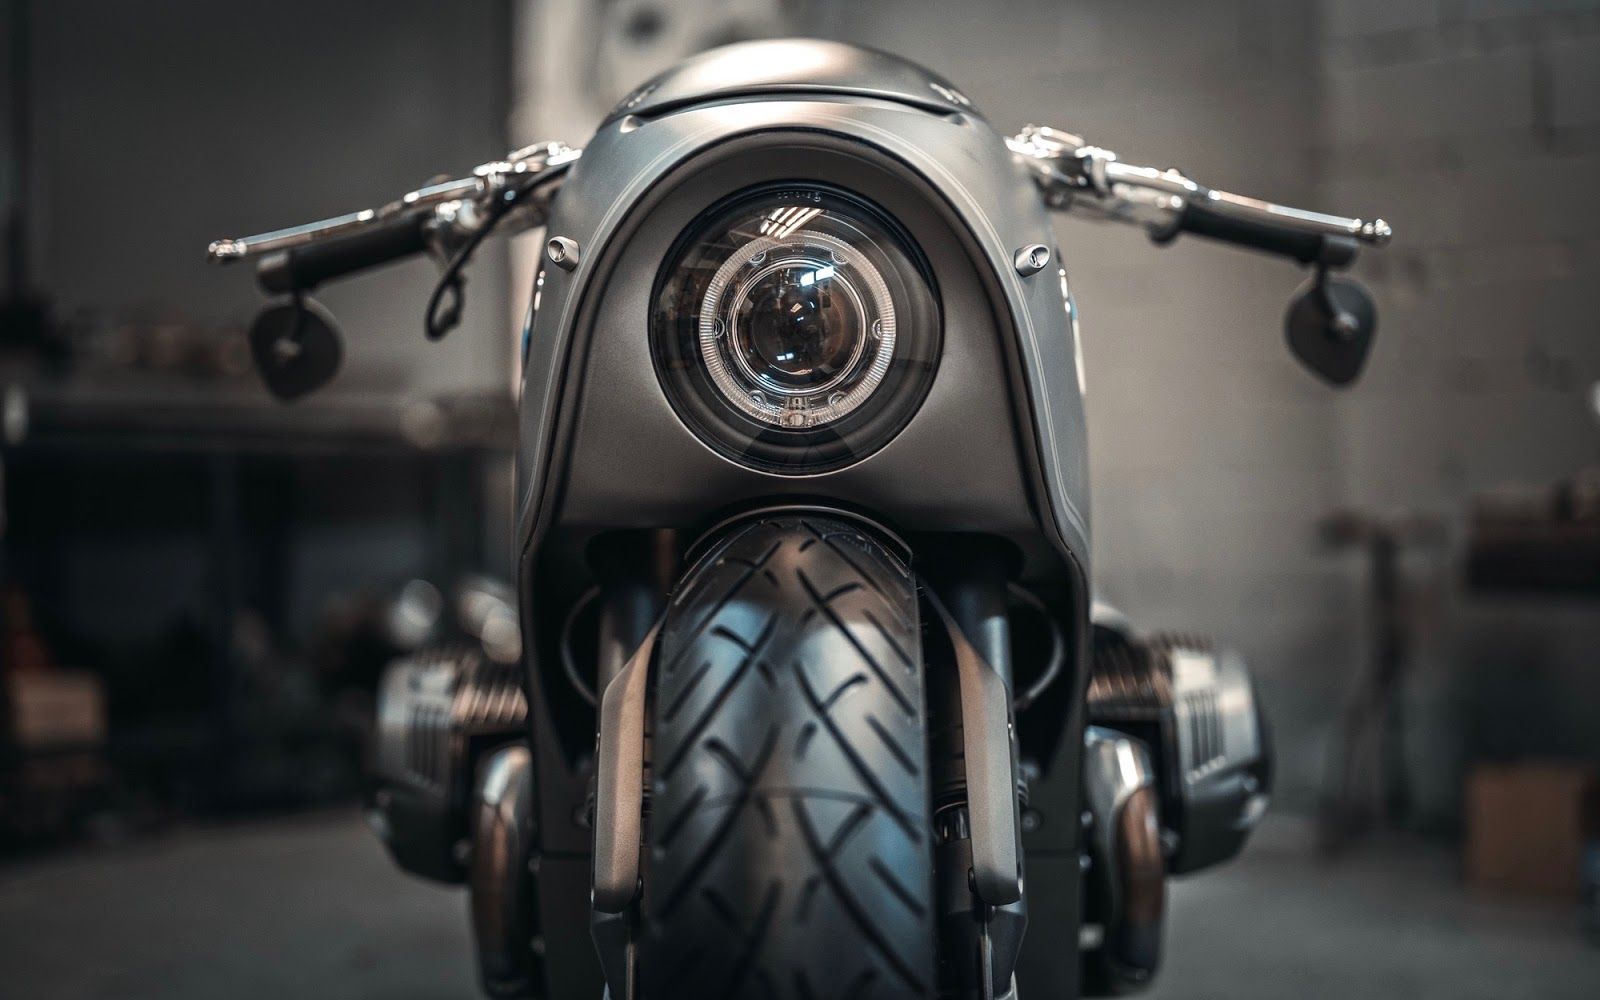 Mikhail Smolânovym of Moscow's Zillers Garage teamed up with John Red Design to turn a BMW R NineT in to a menacing metal masterpiece that's straight out of a sci-fi flick.